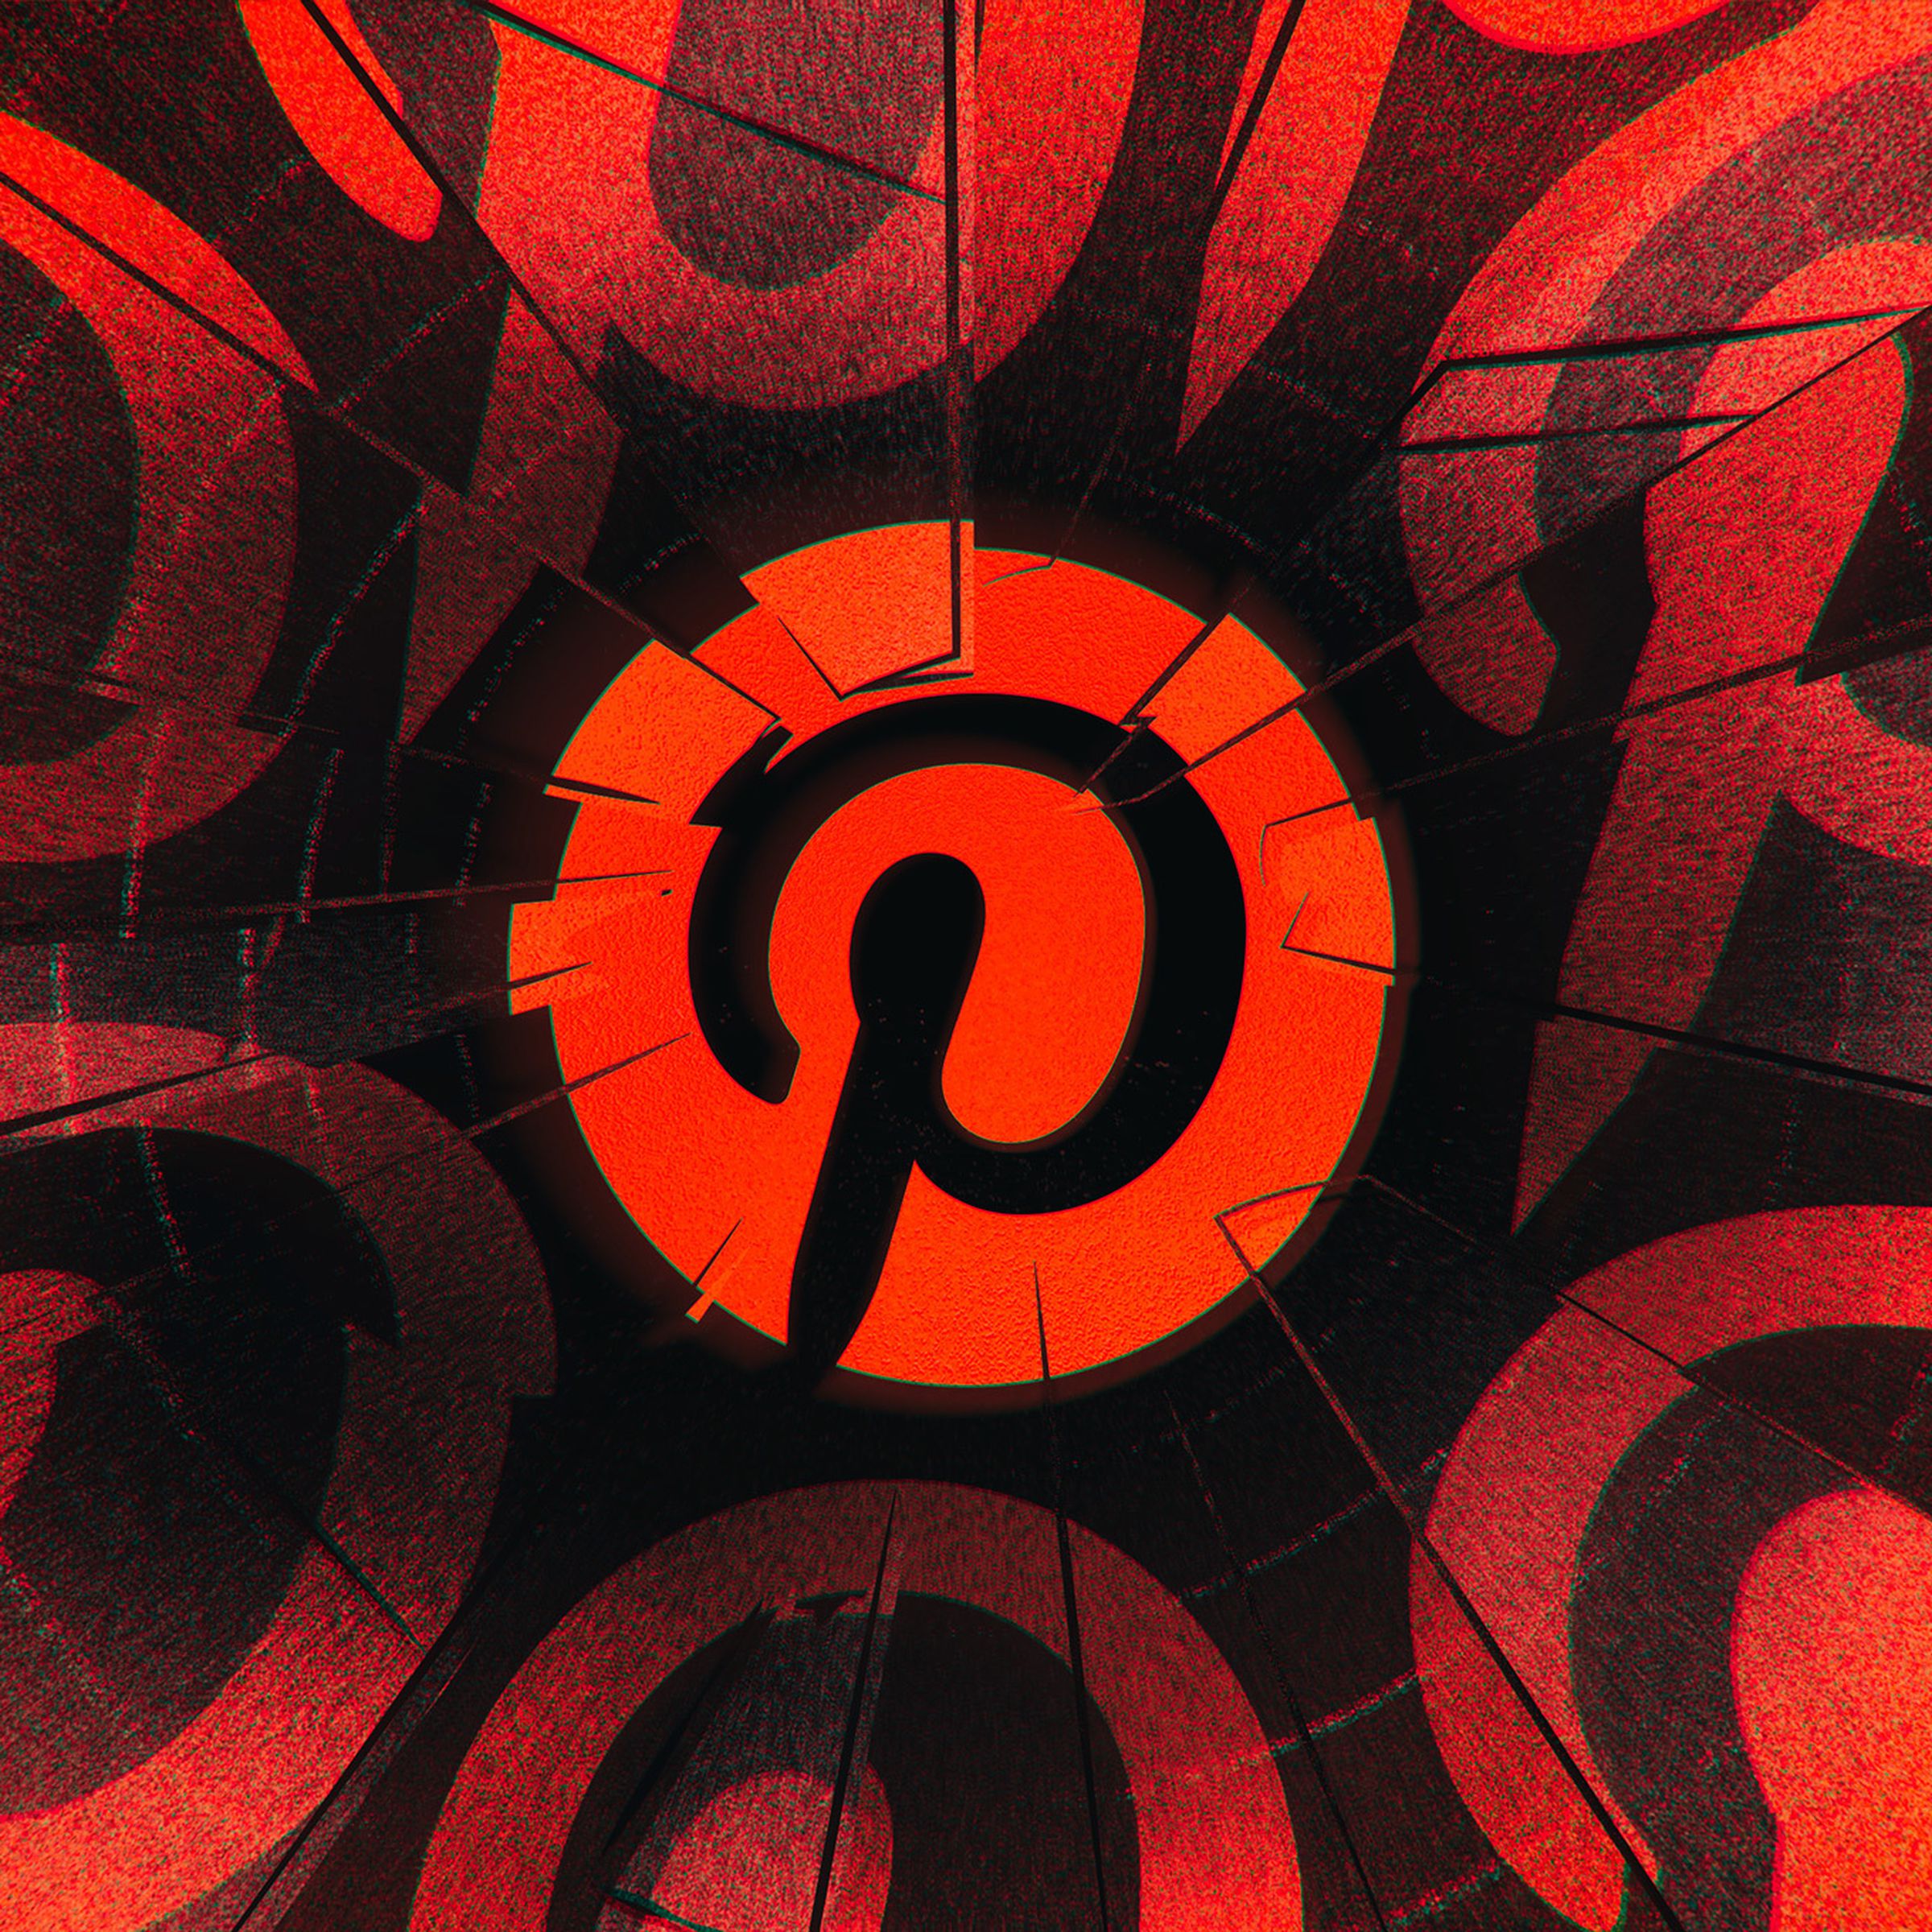 Illustration of the Pinterest logo, seemingly made out of shards of glass.